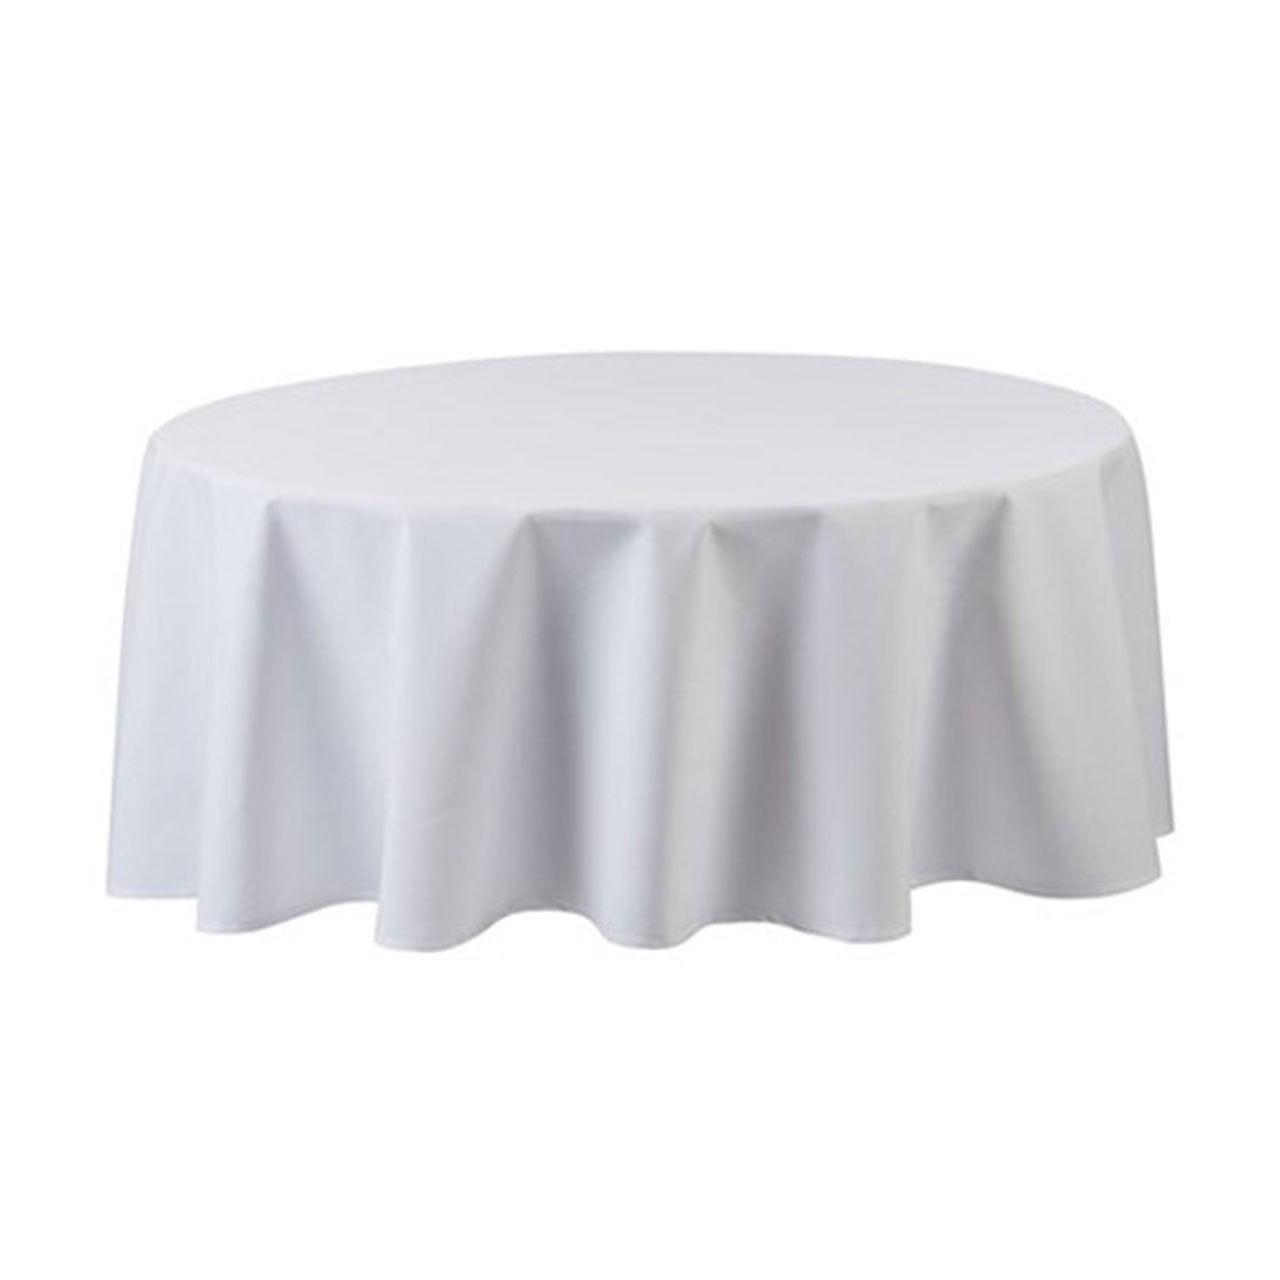 What's the quantity of 90 round tablecloths in a Seamless White case?